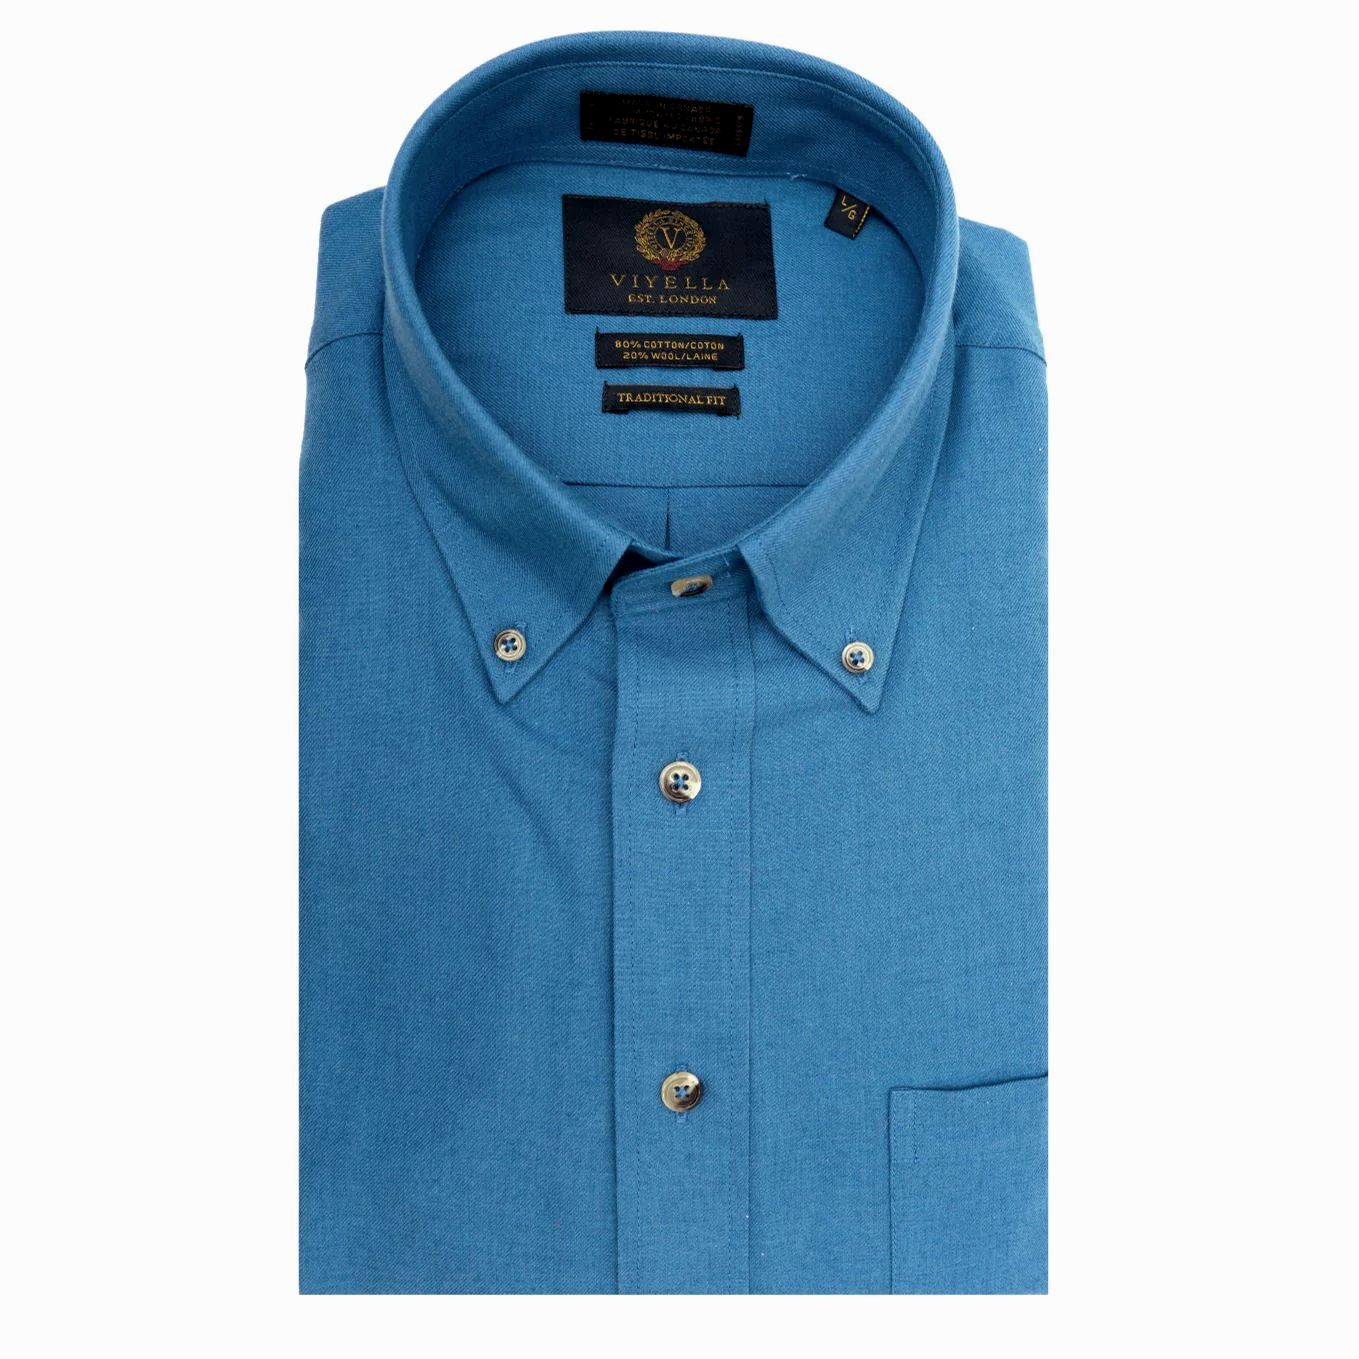 Cotton and Wool Blend Button-Down Shirt in Imperial Blue by Viyella